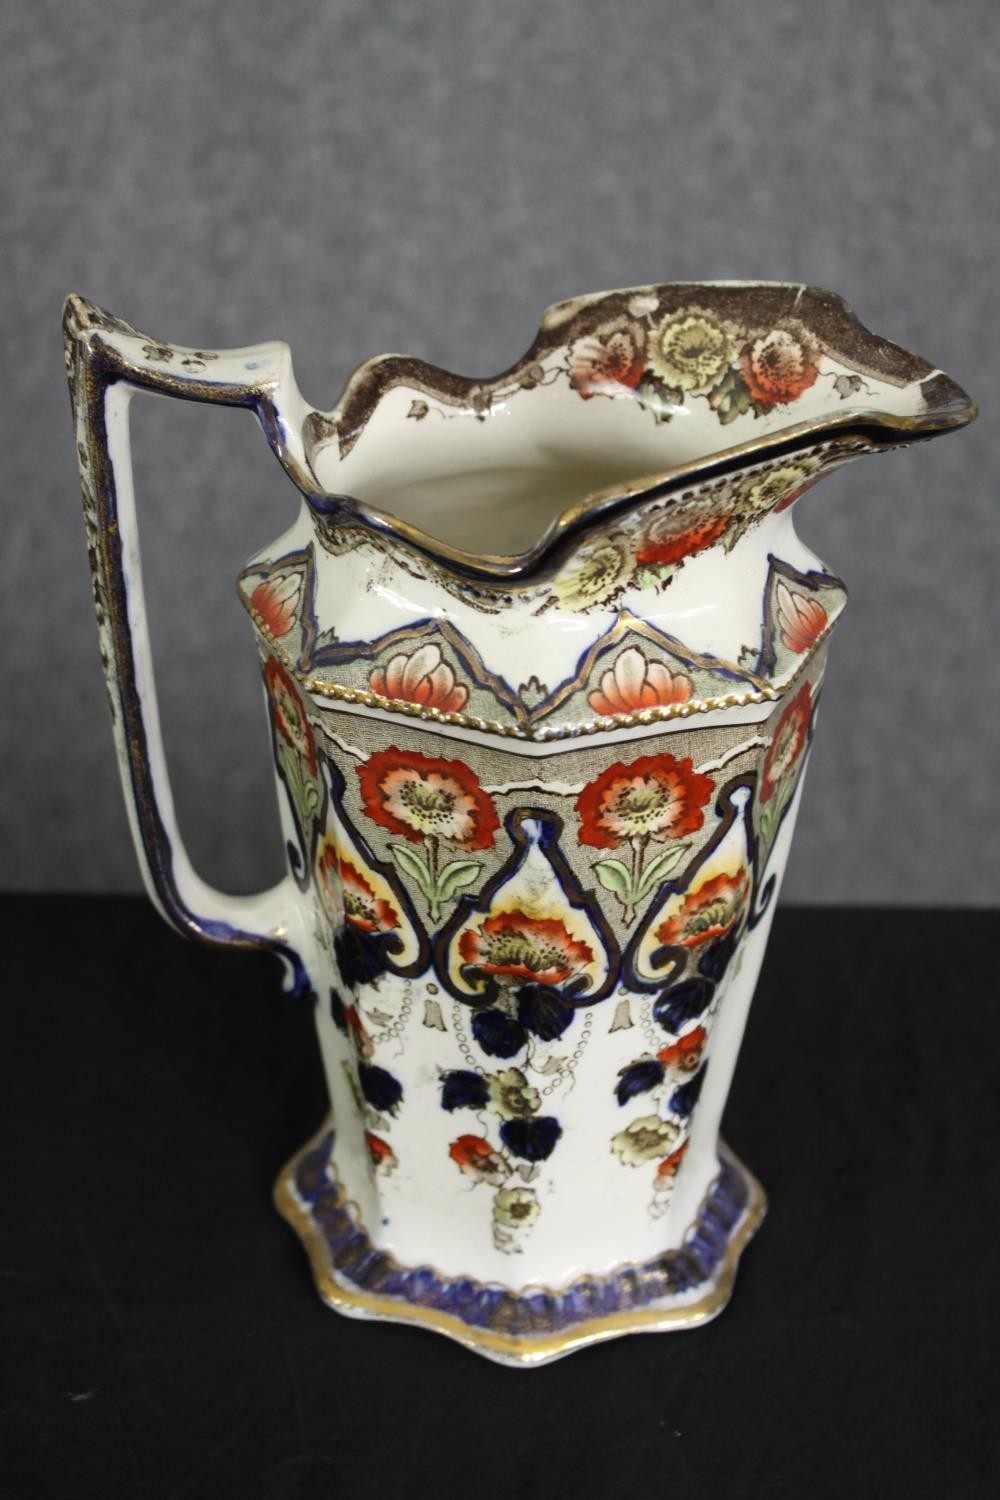 A group of various Staffordshire porcelain tea pots, jugs and plates. H.21cm. (largest). - Image 3 of 16